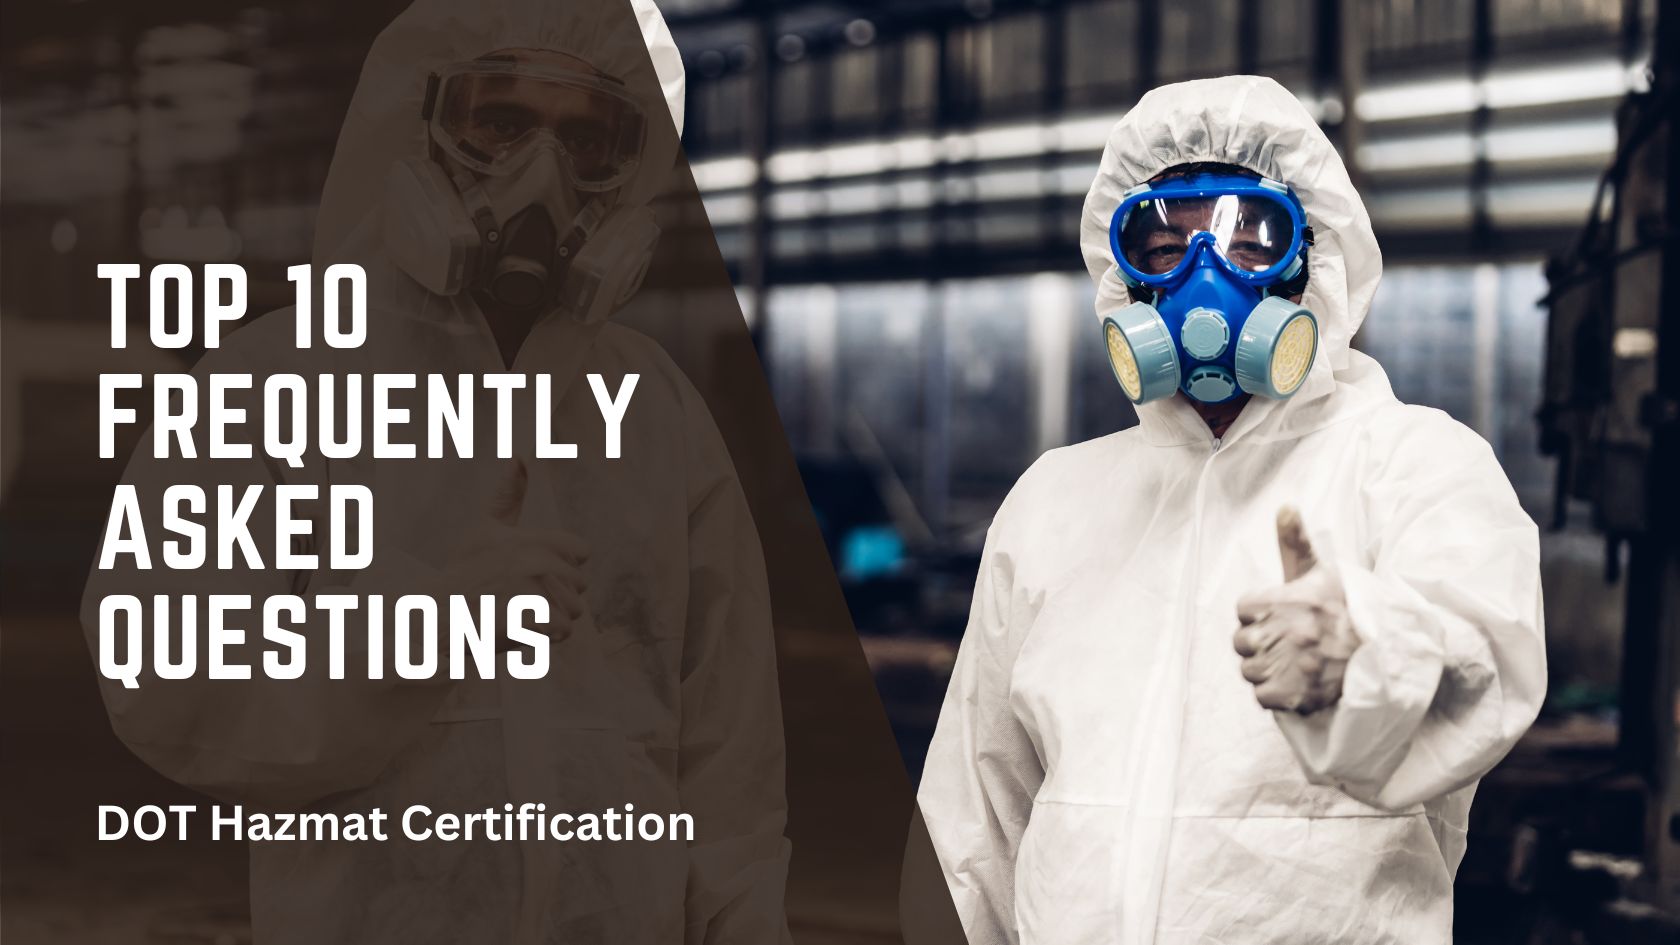 Top 10 Frequently Asked Questions about DOT Hazmat Certification